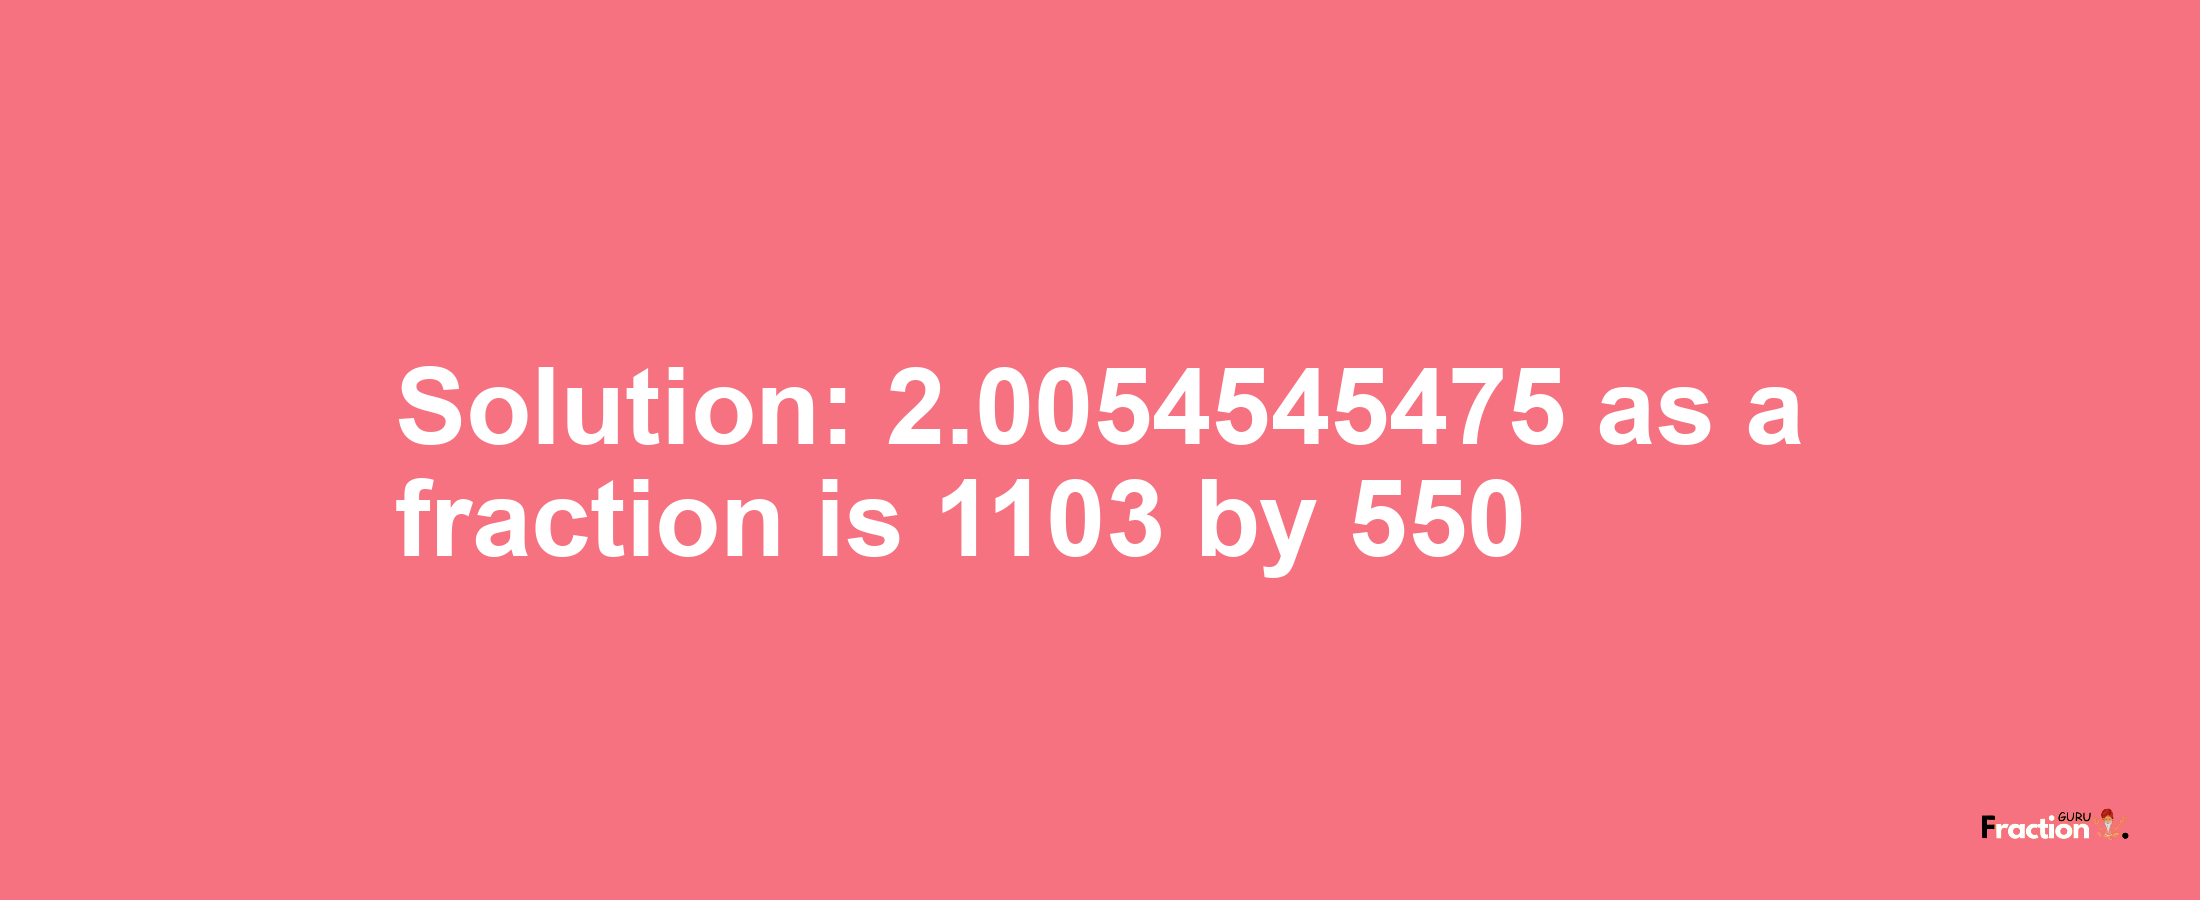 Solution:2.0054545475 as a fraction is 1103/550